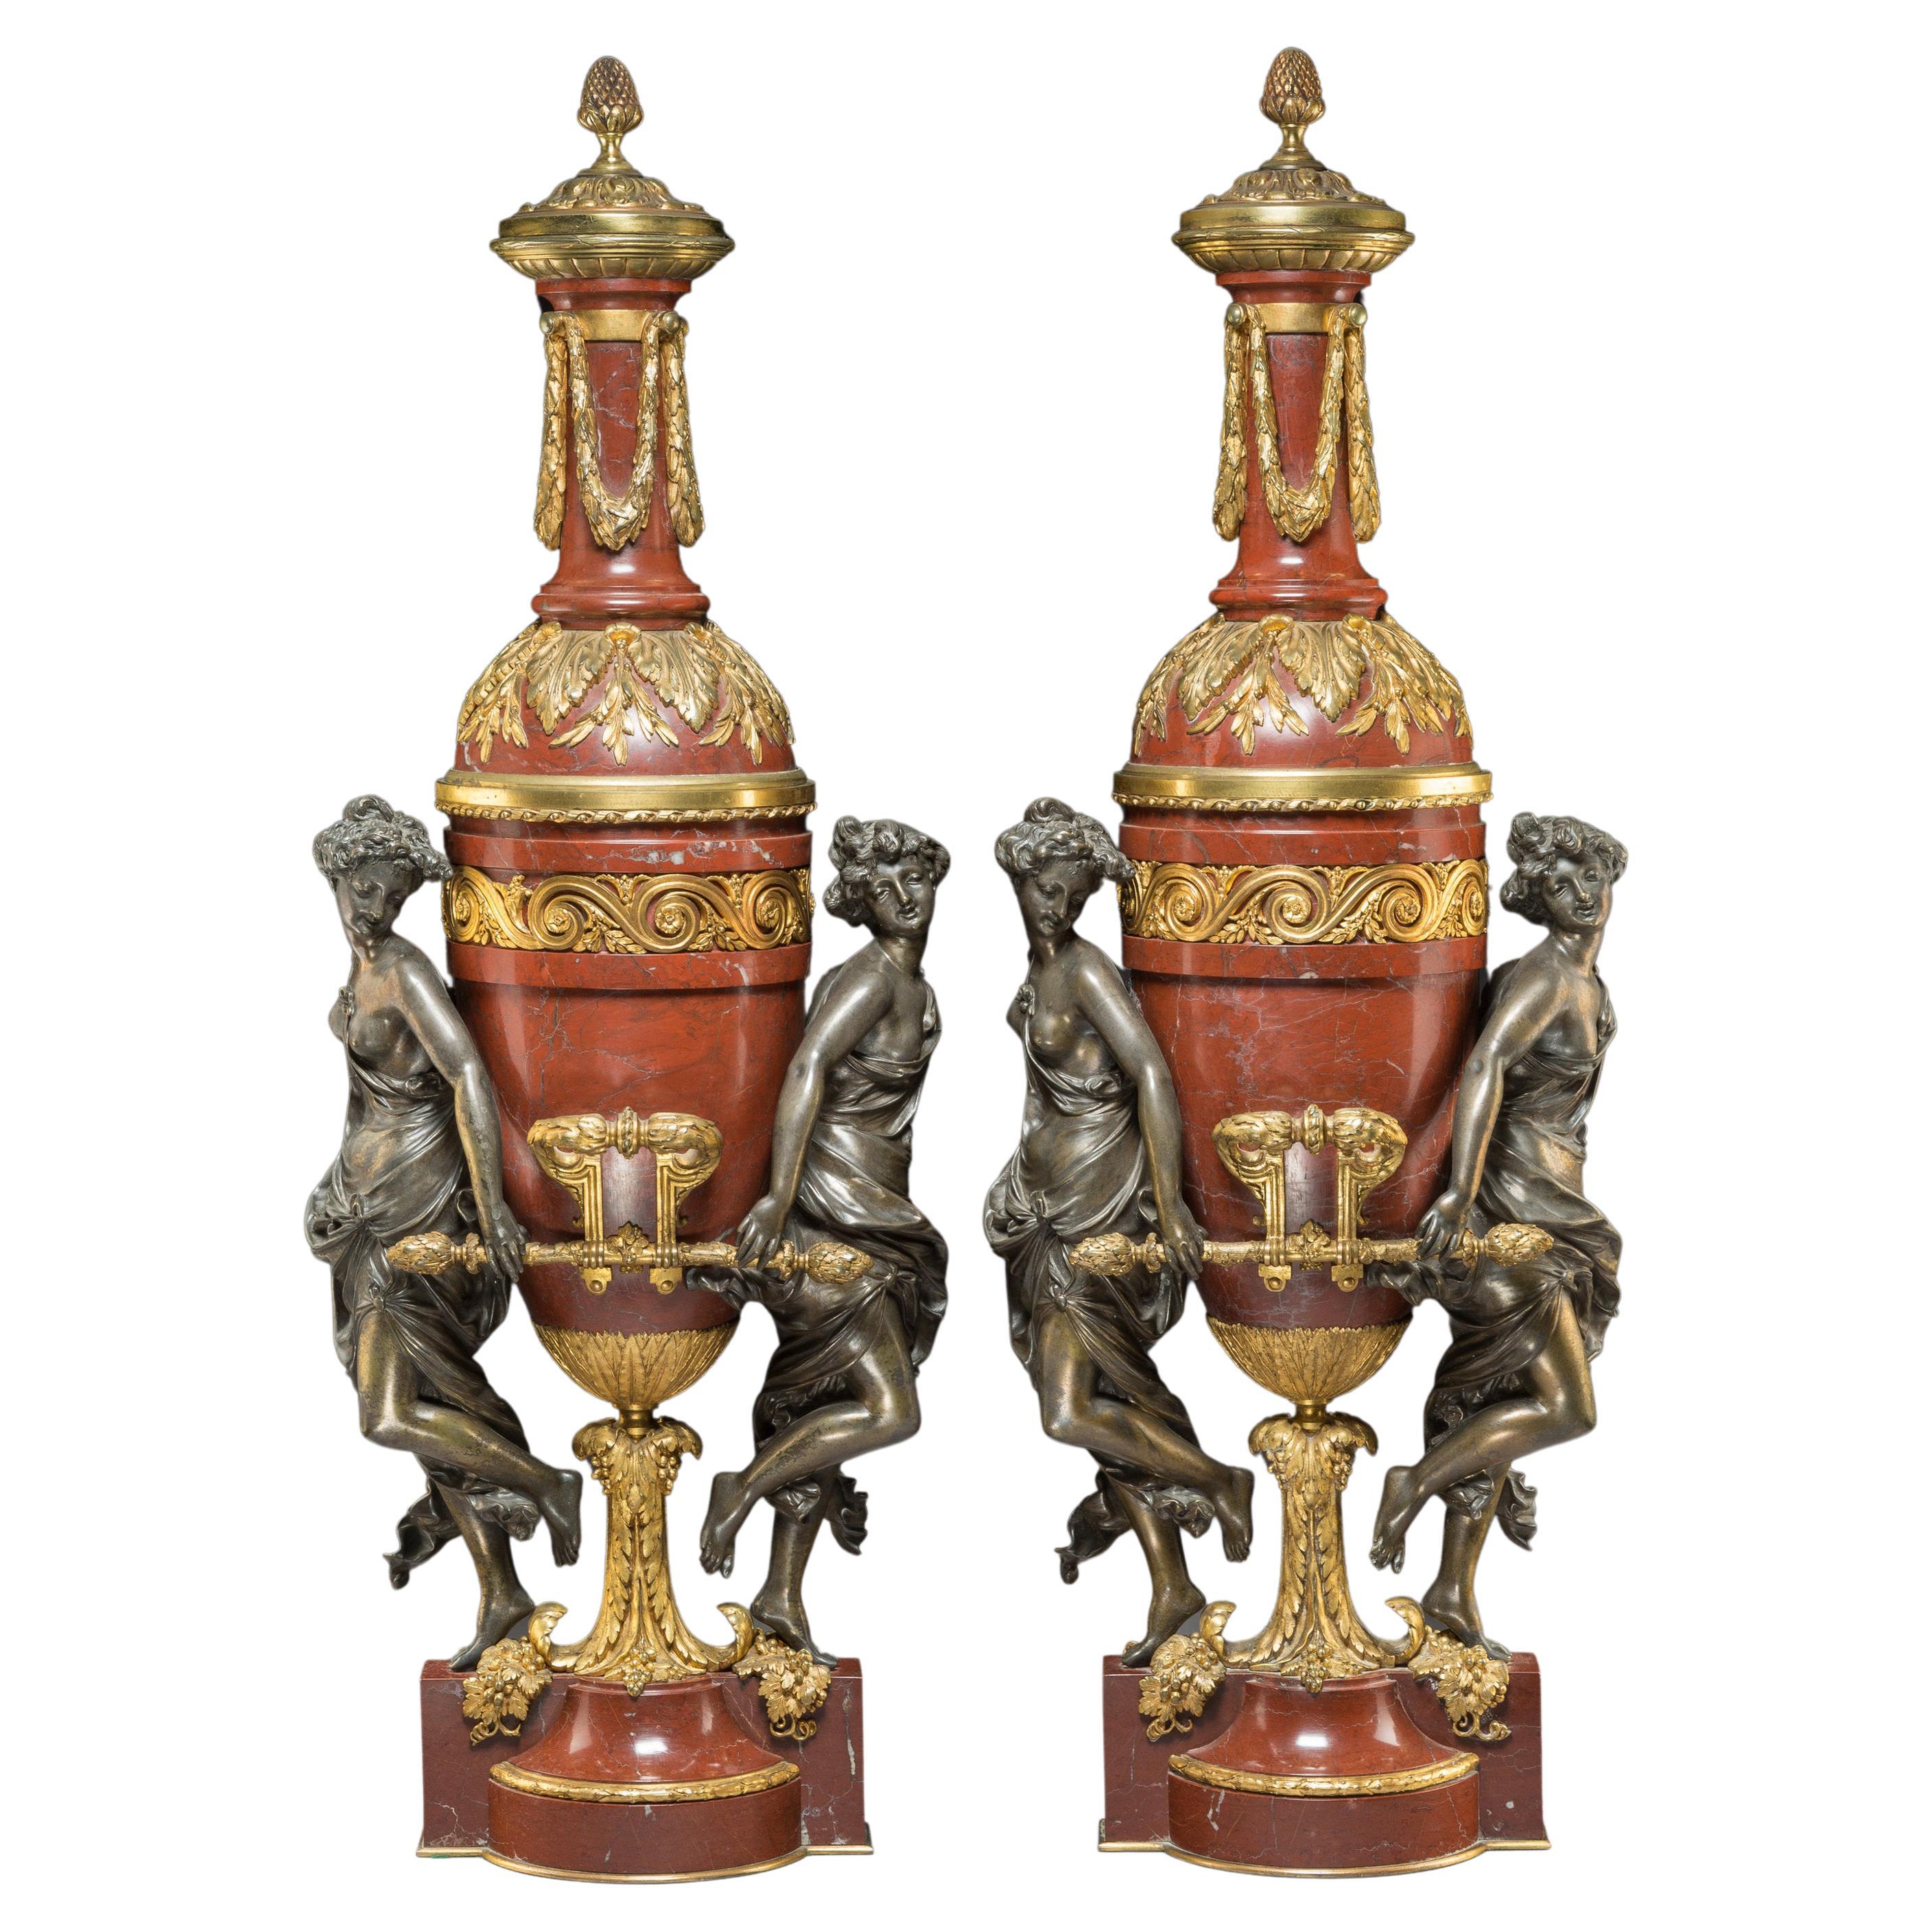 French Ormolu and Patinated Bronze-Mounted Marble Vases with Covers by Gagneau